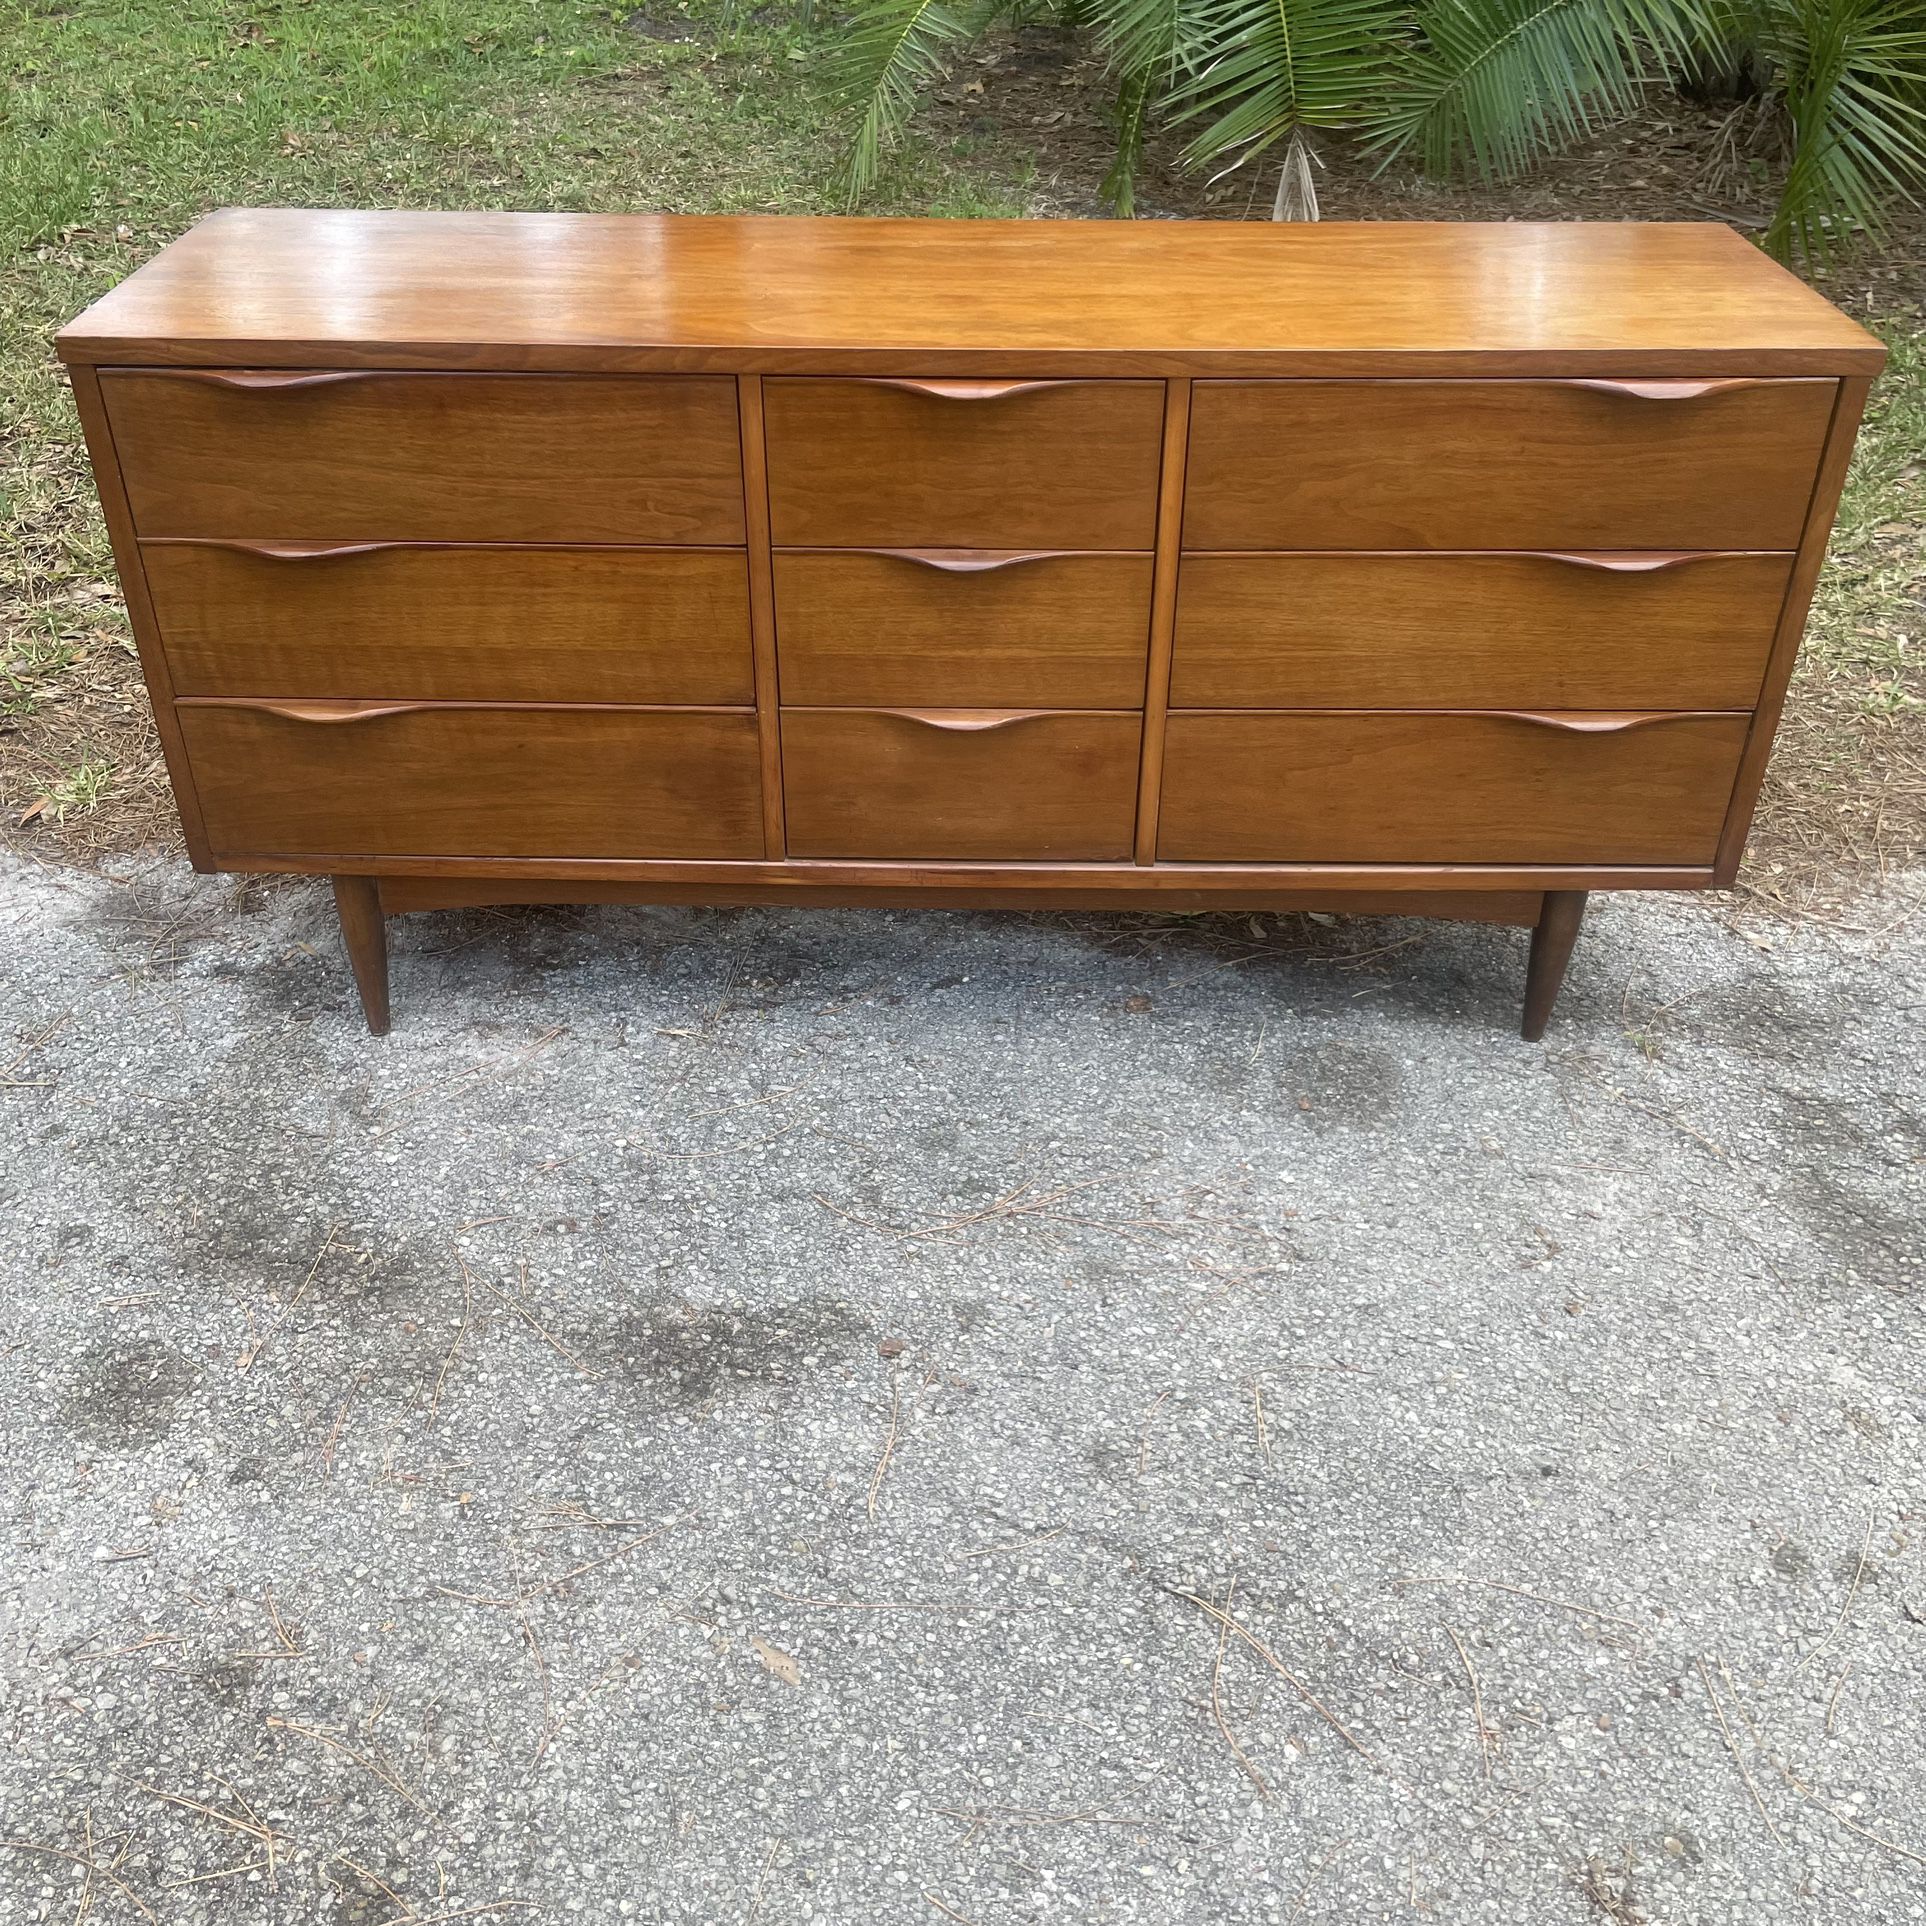 Restored Mid Century Modern 9 Drawer Credenza With Natural Wood Top And Sculpted Wood Handles